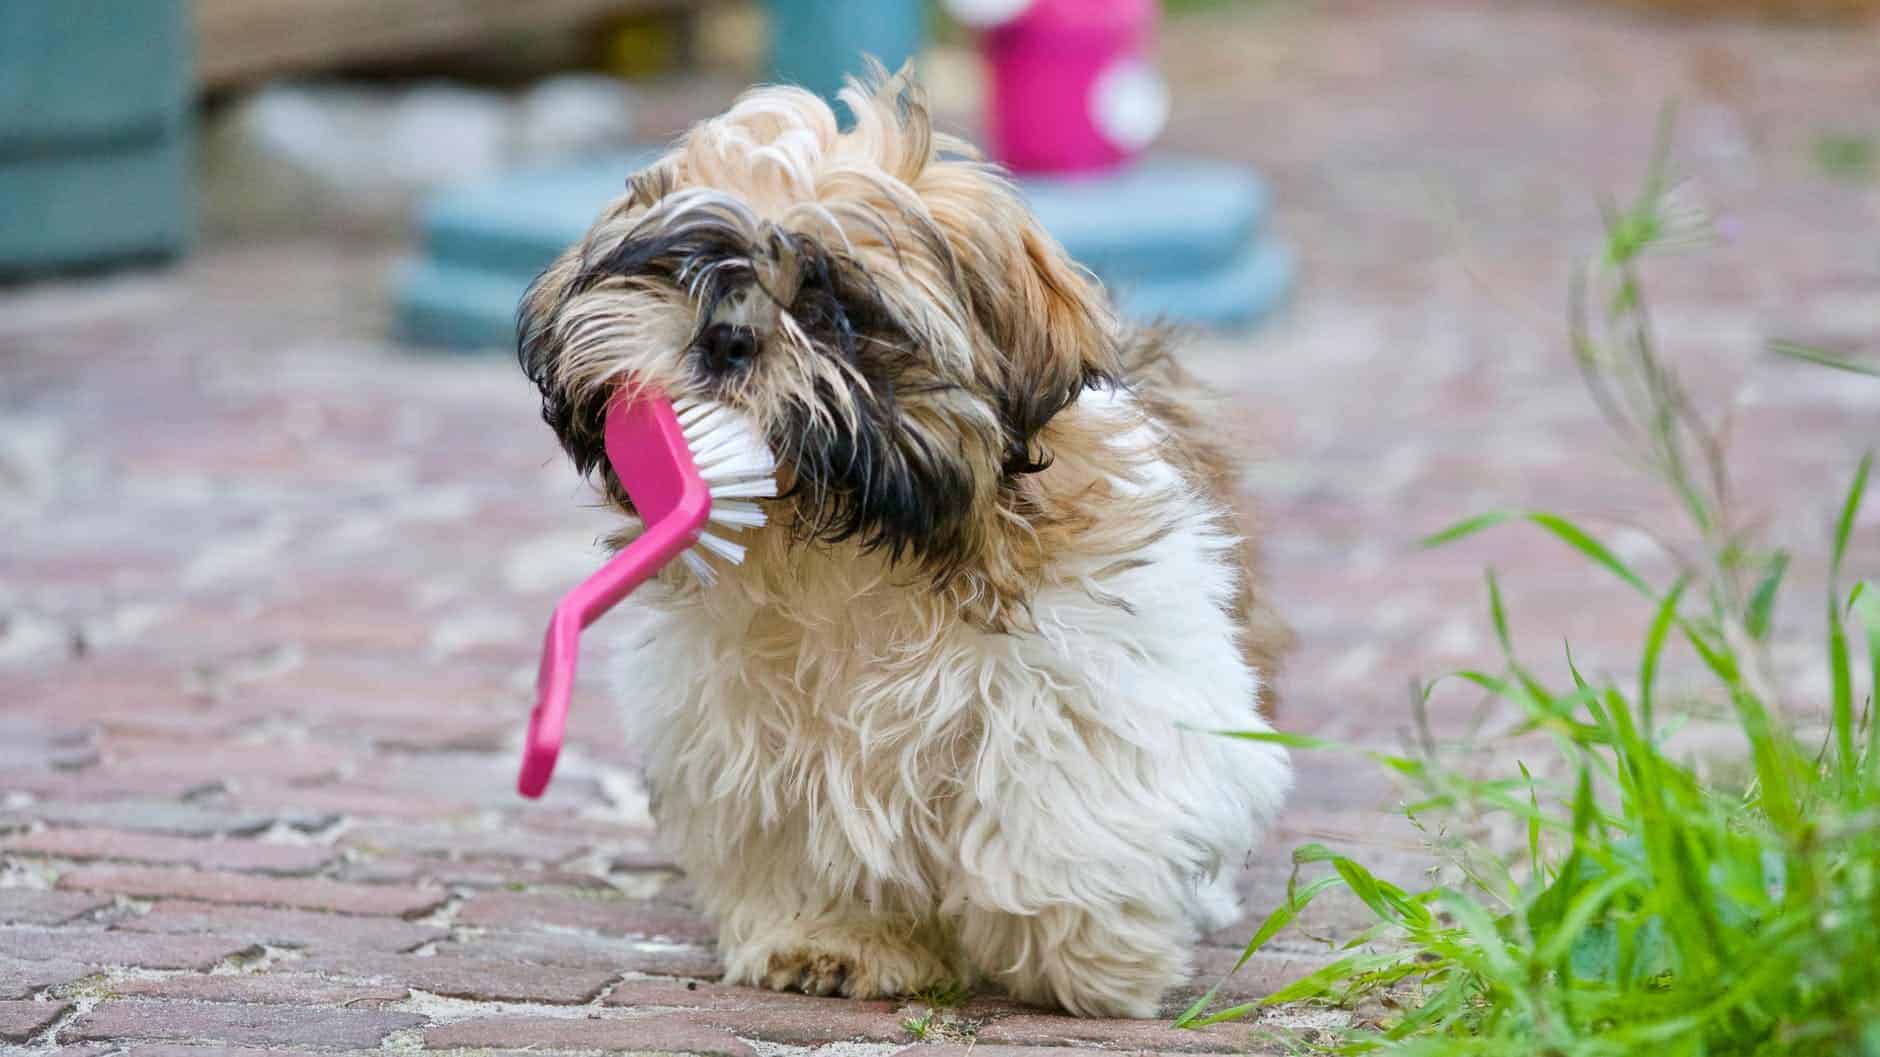 A cute, small, dog with a pink handle brush in it's mouth.